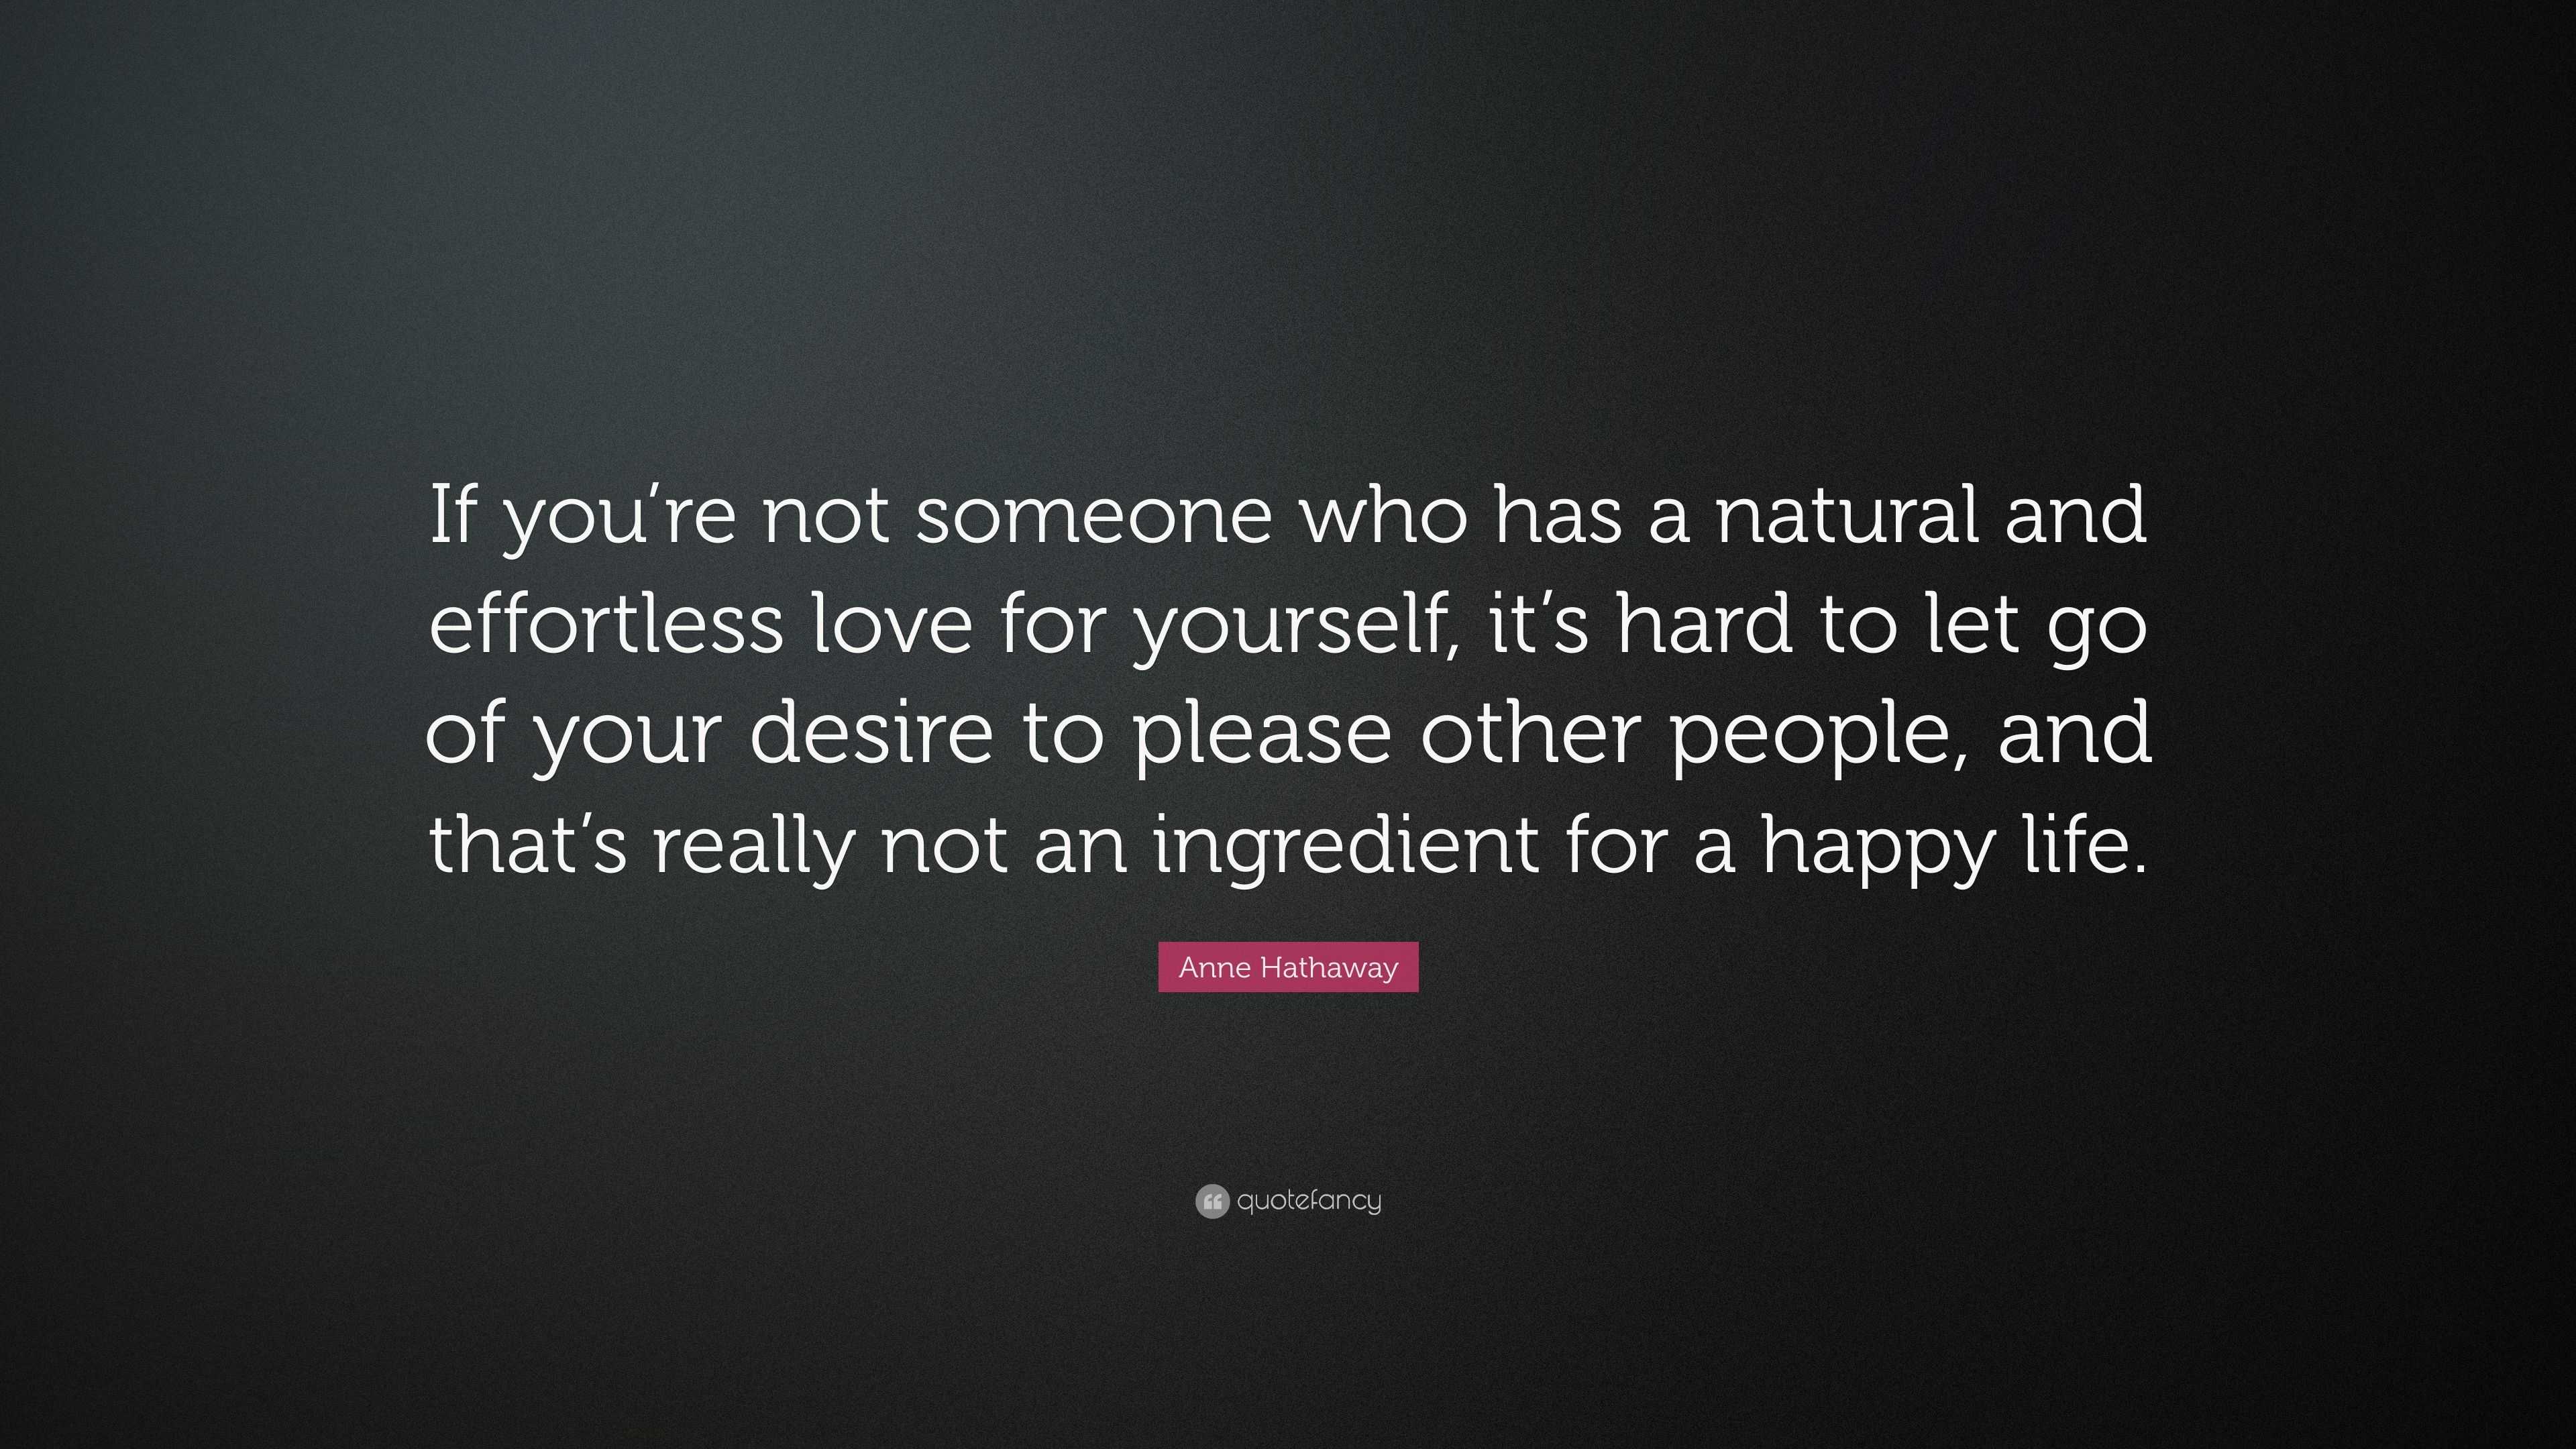 Anne Hathaway Quote “If you re not someone who has a natural and